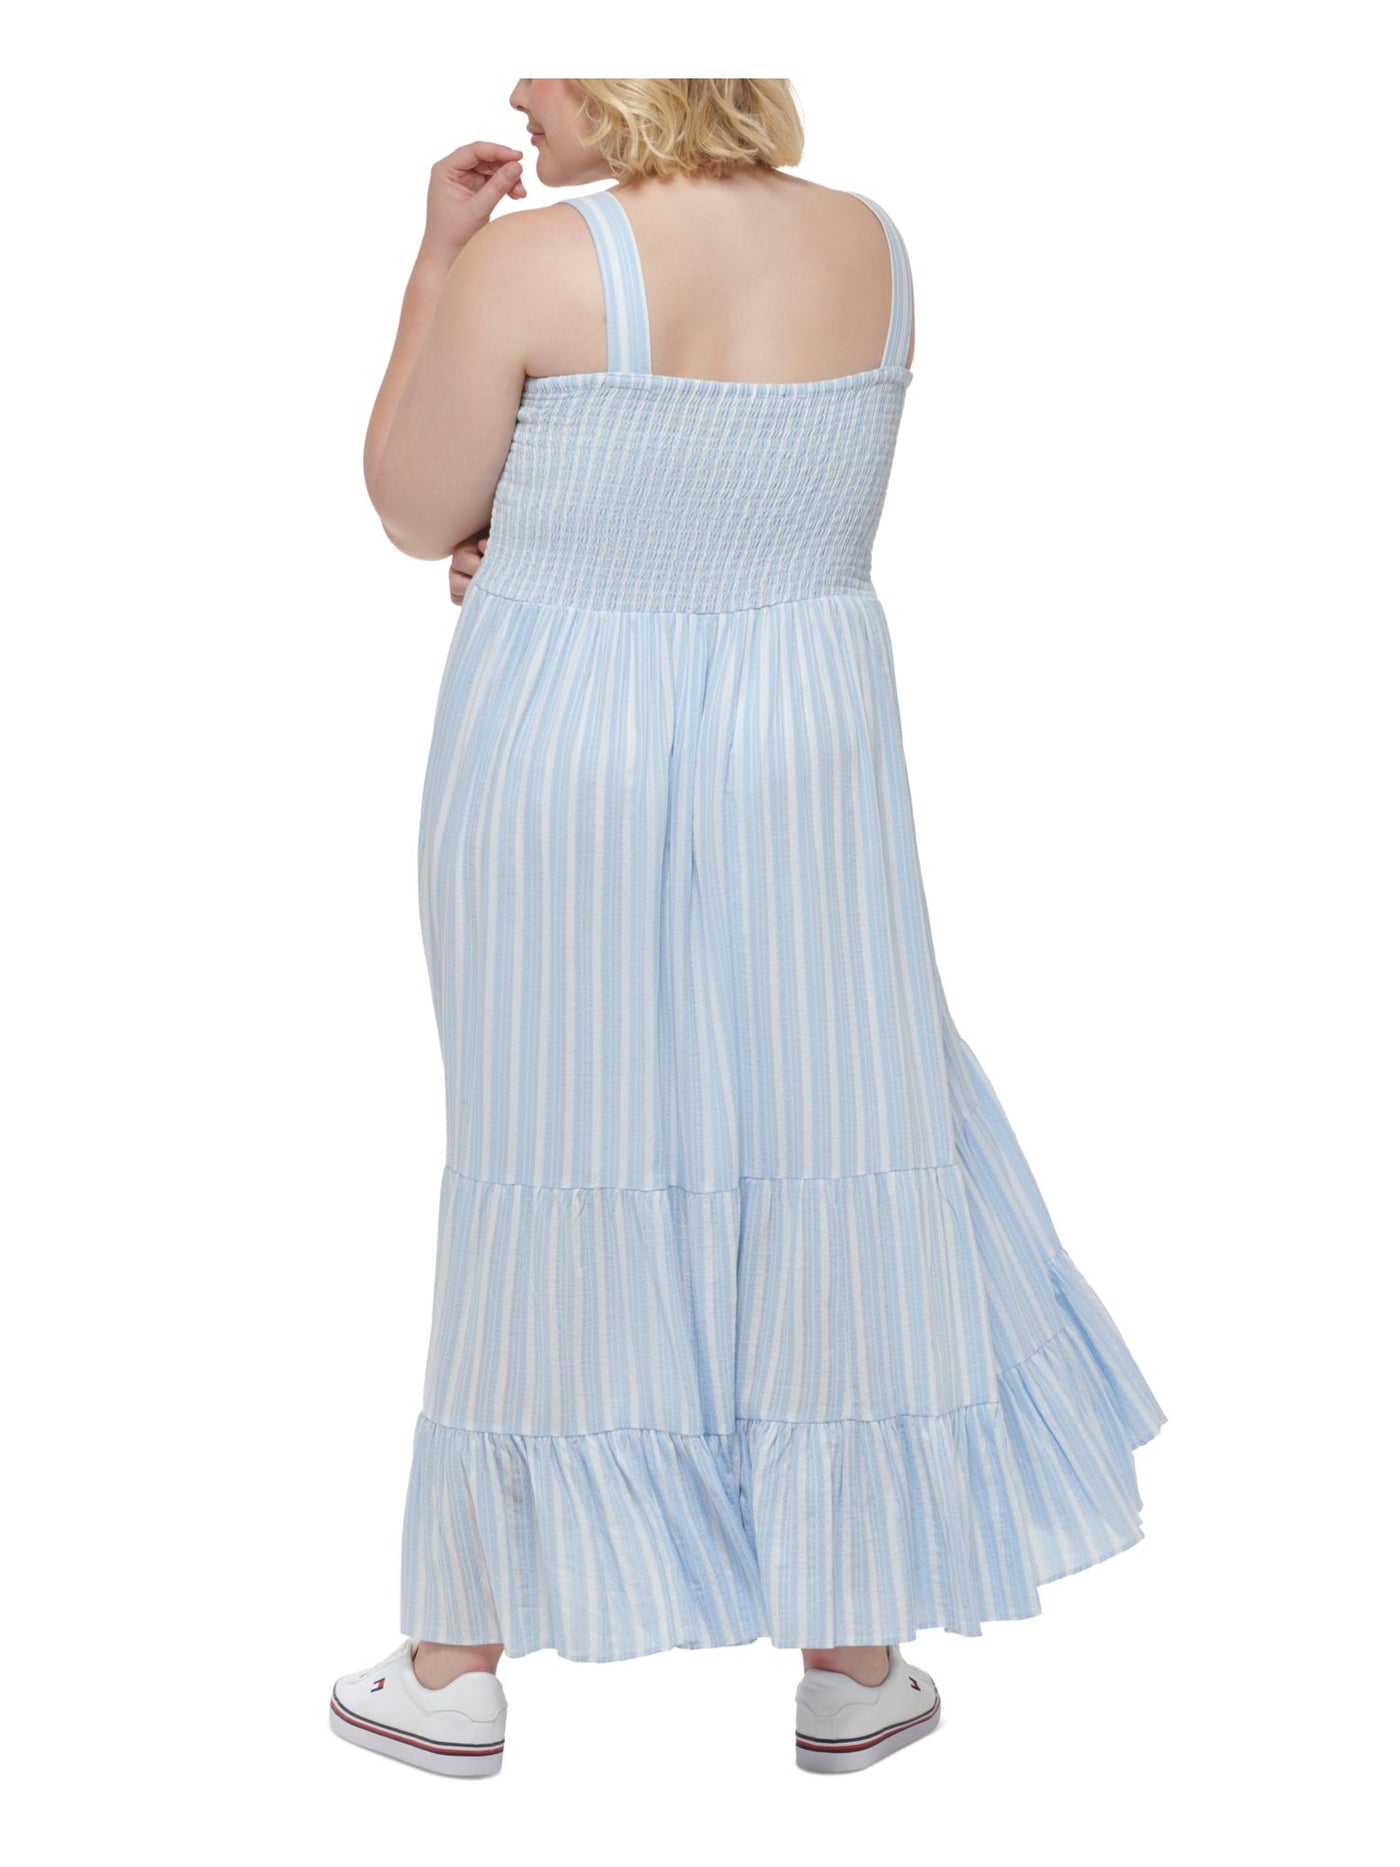 TOMMY HILFIGER Womens Light Blue Smocked Lined Tiered Pullover Striped Sleeveless Square Neck Maxi Fit + Flare Dress Plus 2X